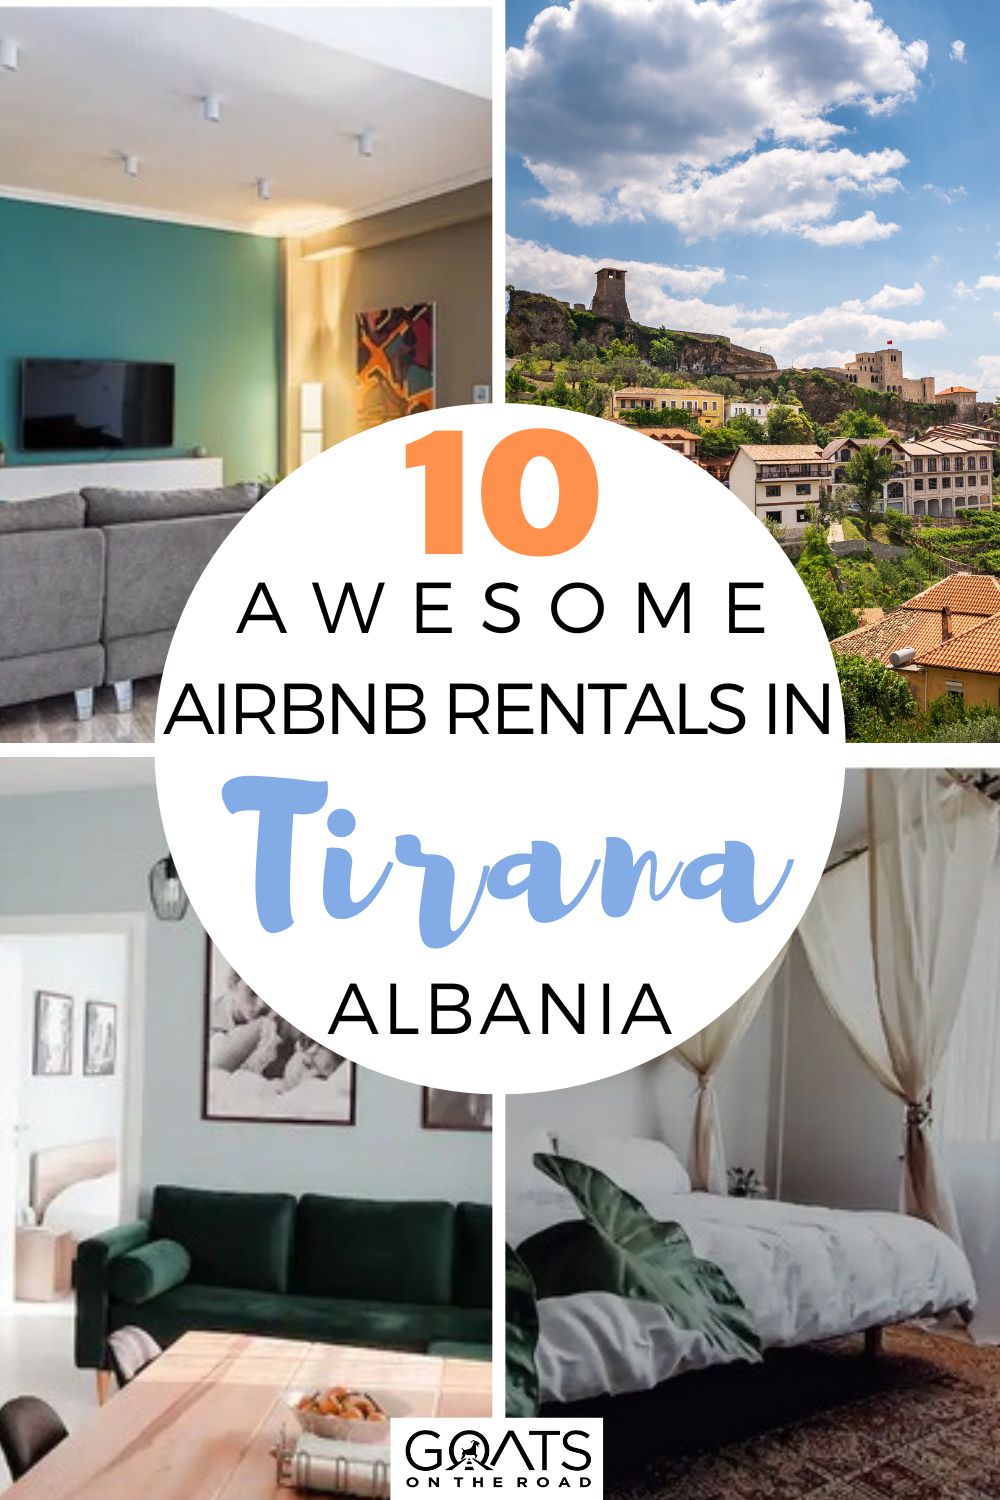 10 Awesome Airbnb Rentals in Tirana, Albania